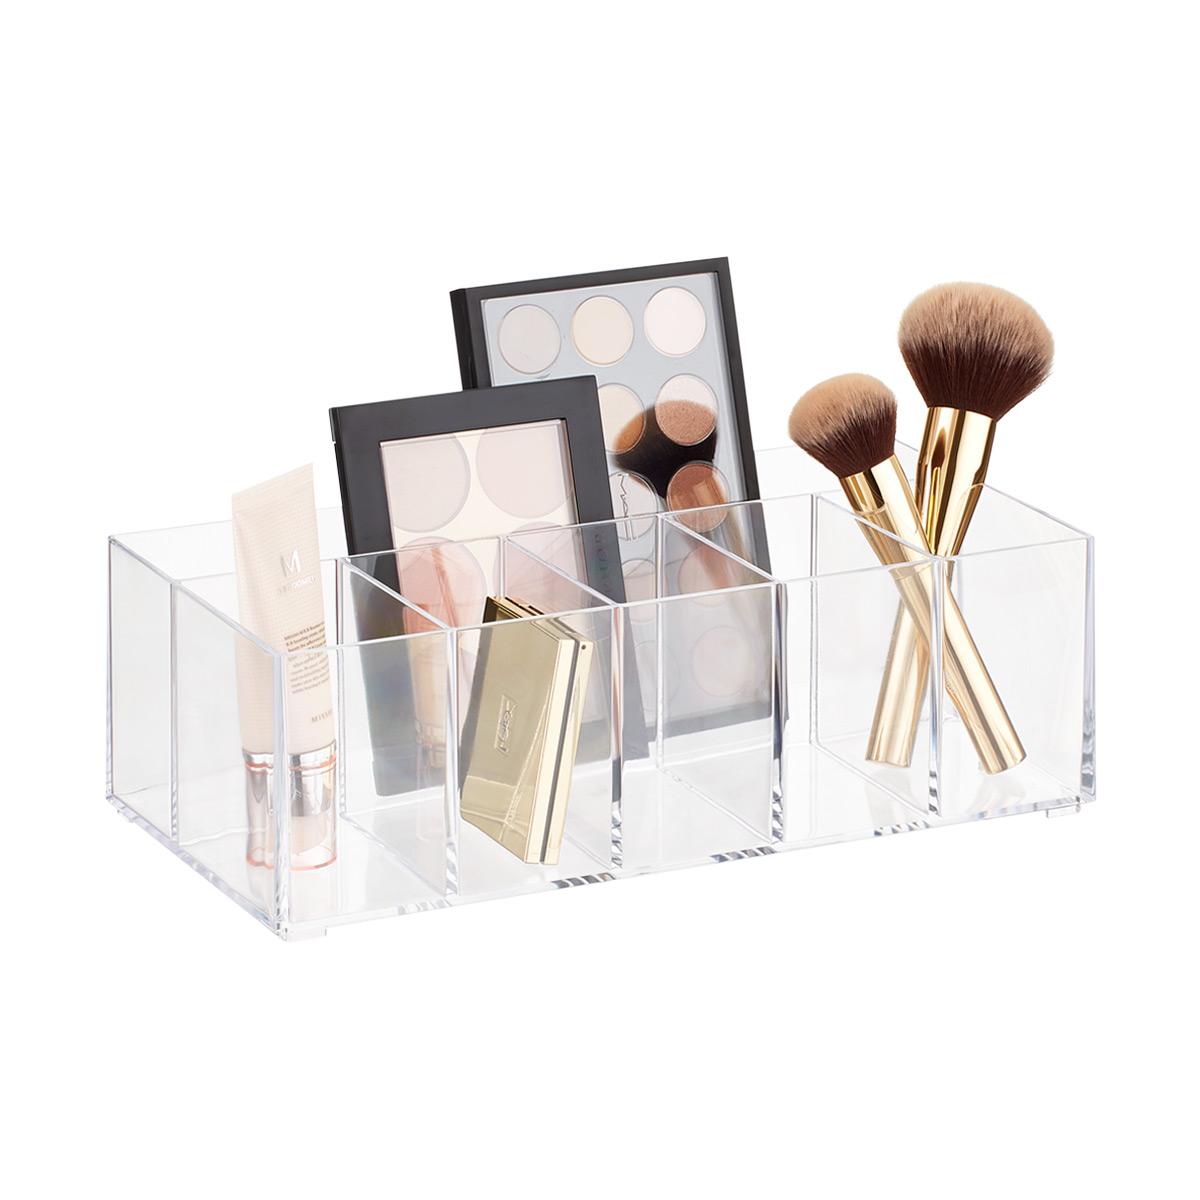 https://images.containerstore.com/catalogimages/347271/10073843-clarity-cosmetics-&-vanity-.jpg